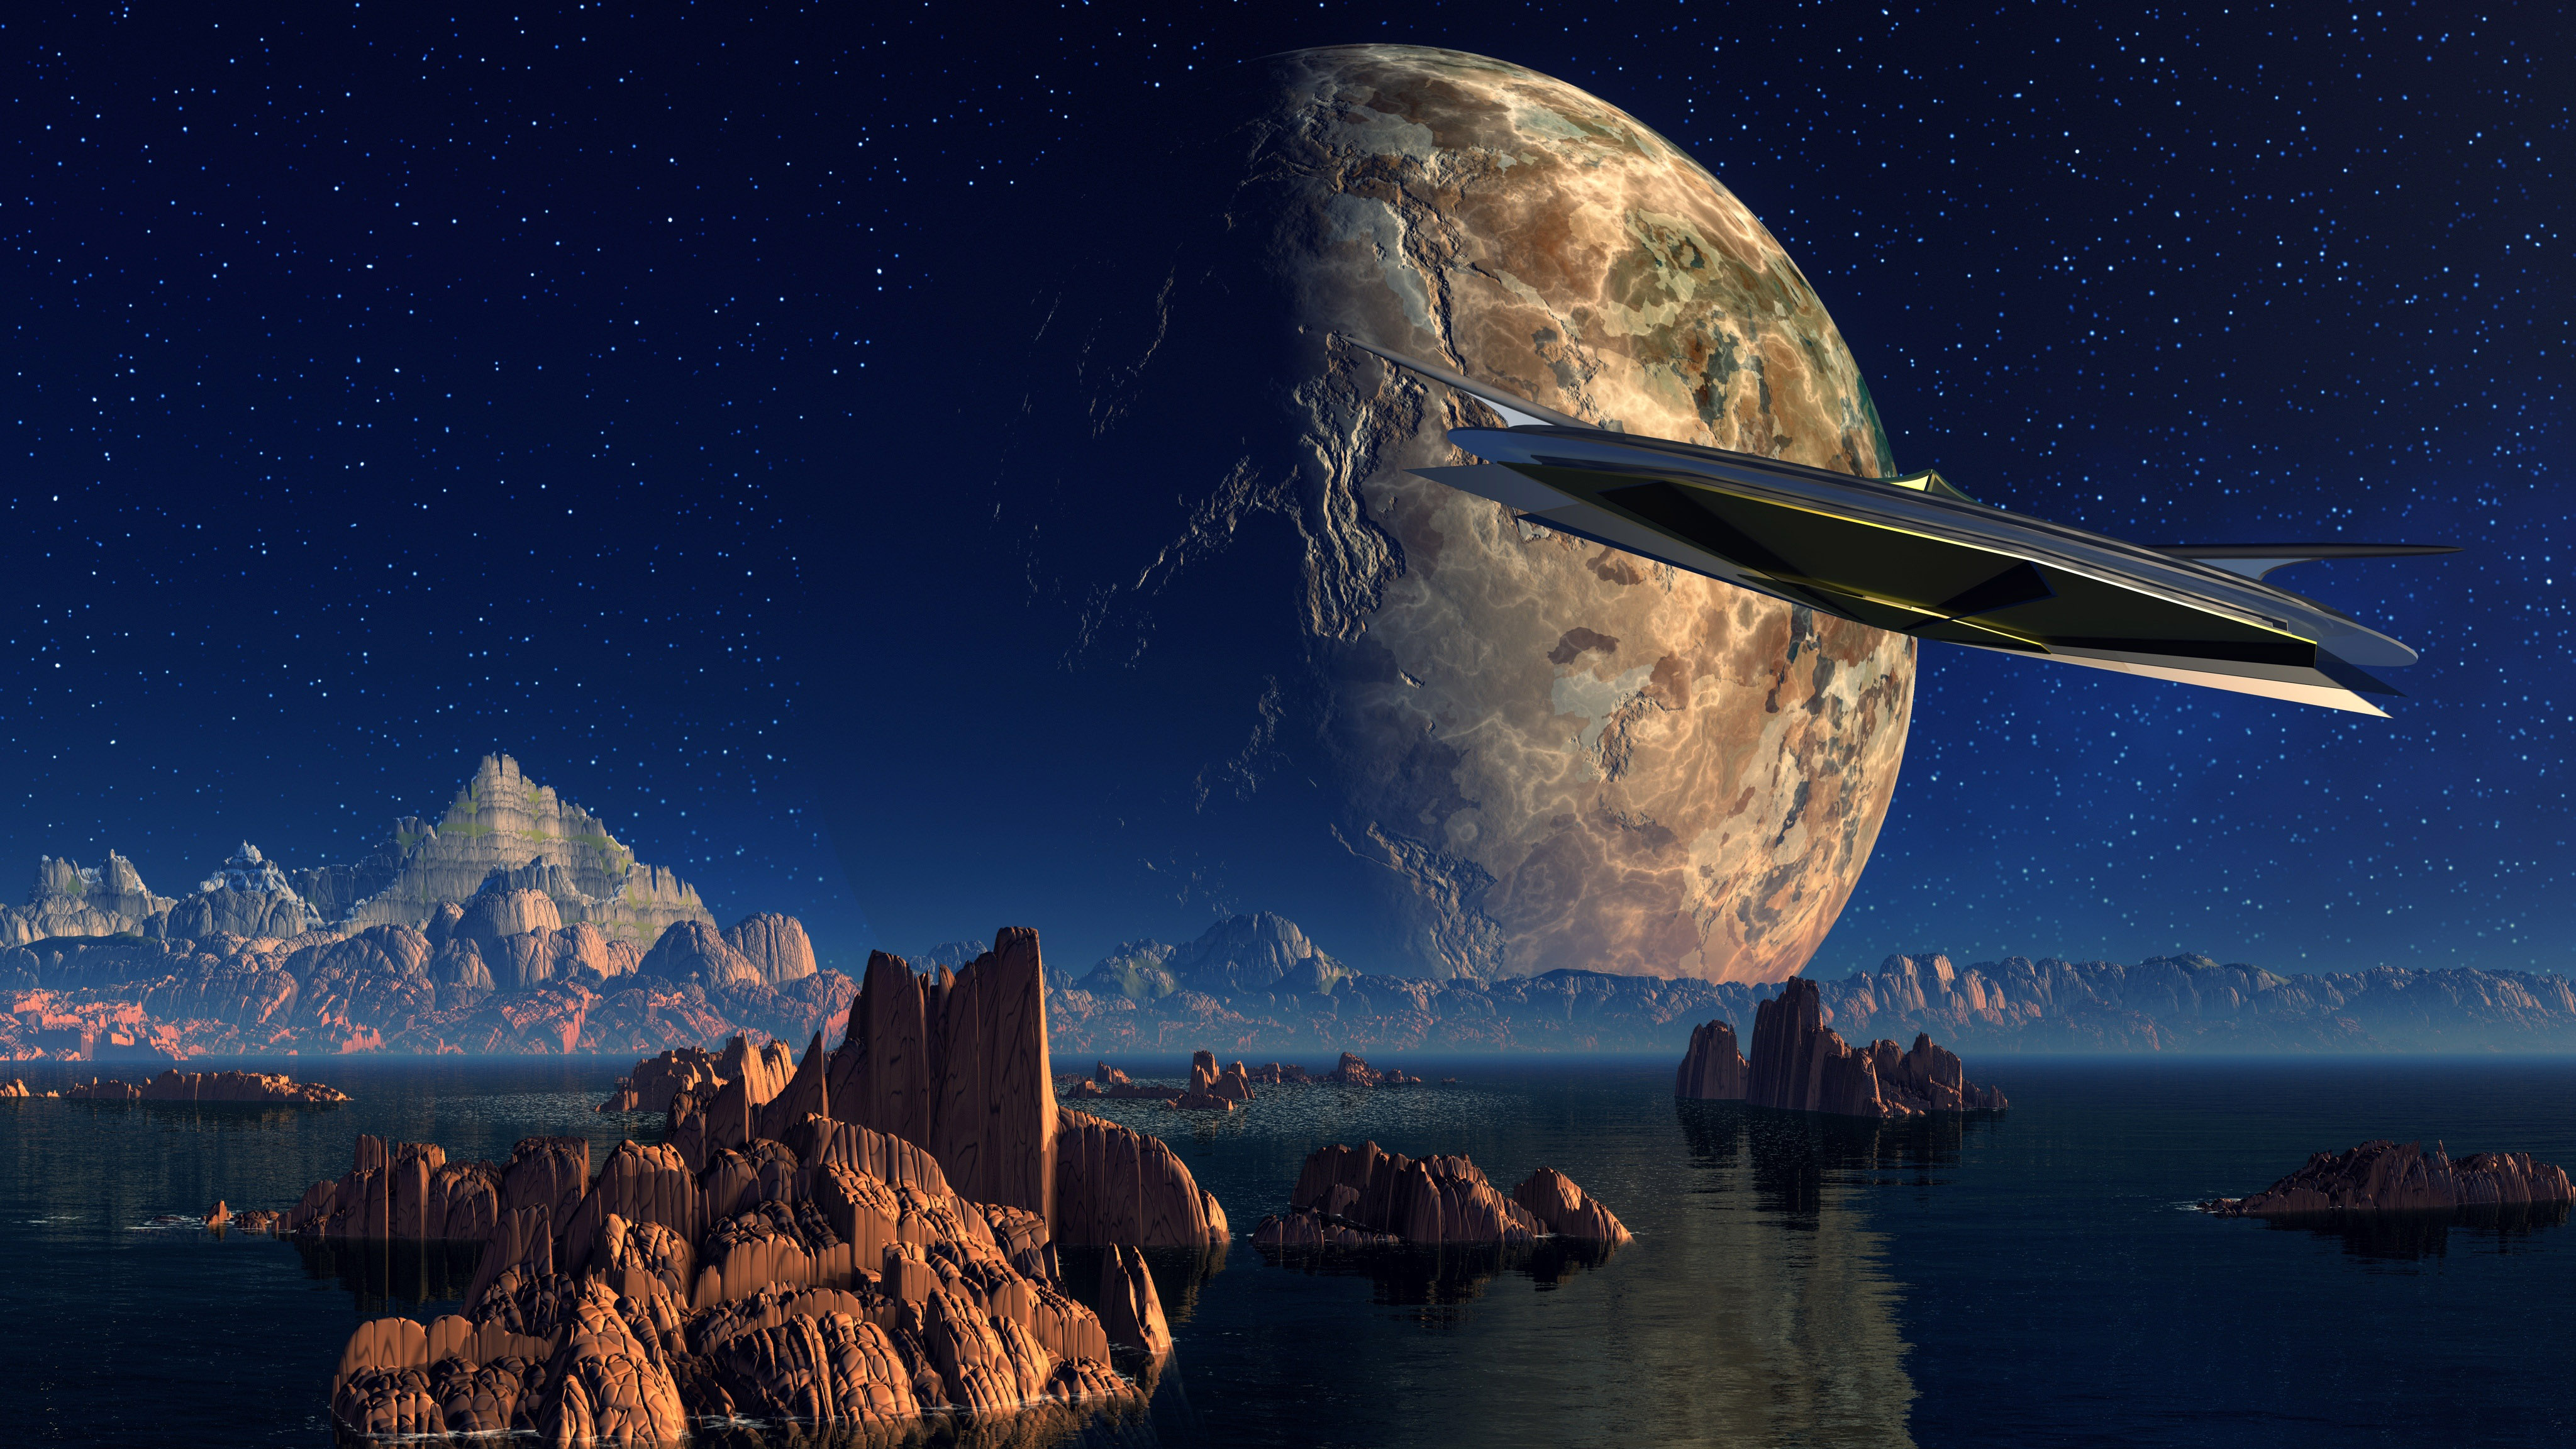 UFO Flying Saucer in an otheworldy landscape image - Free ...